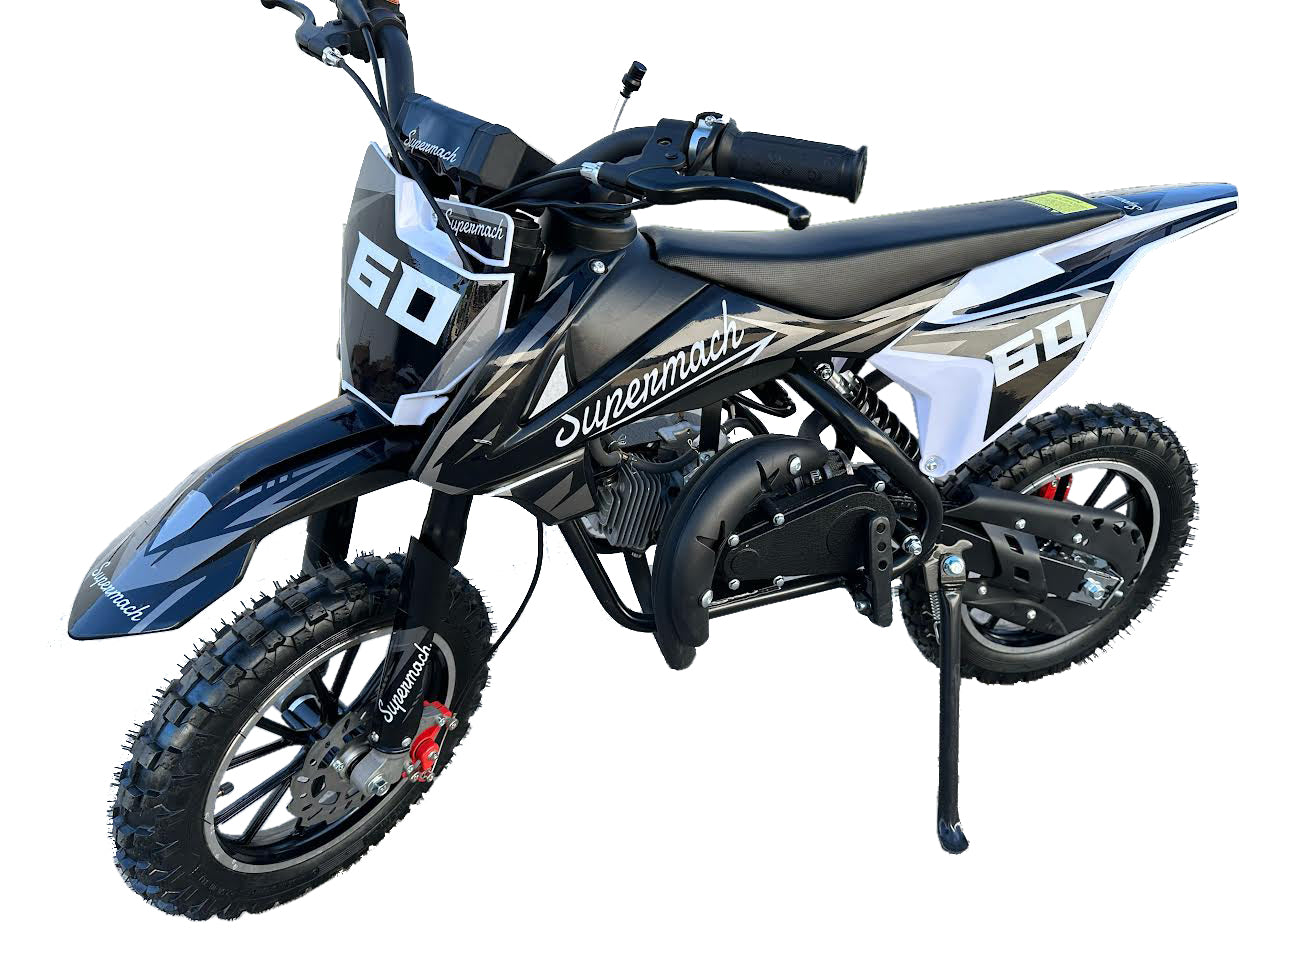 49cc 2-Stroke Dirt Bike Air-Cooled Off-Road for Kids